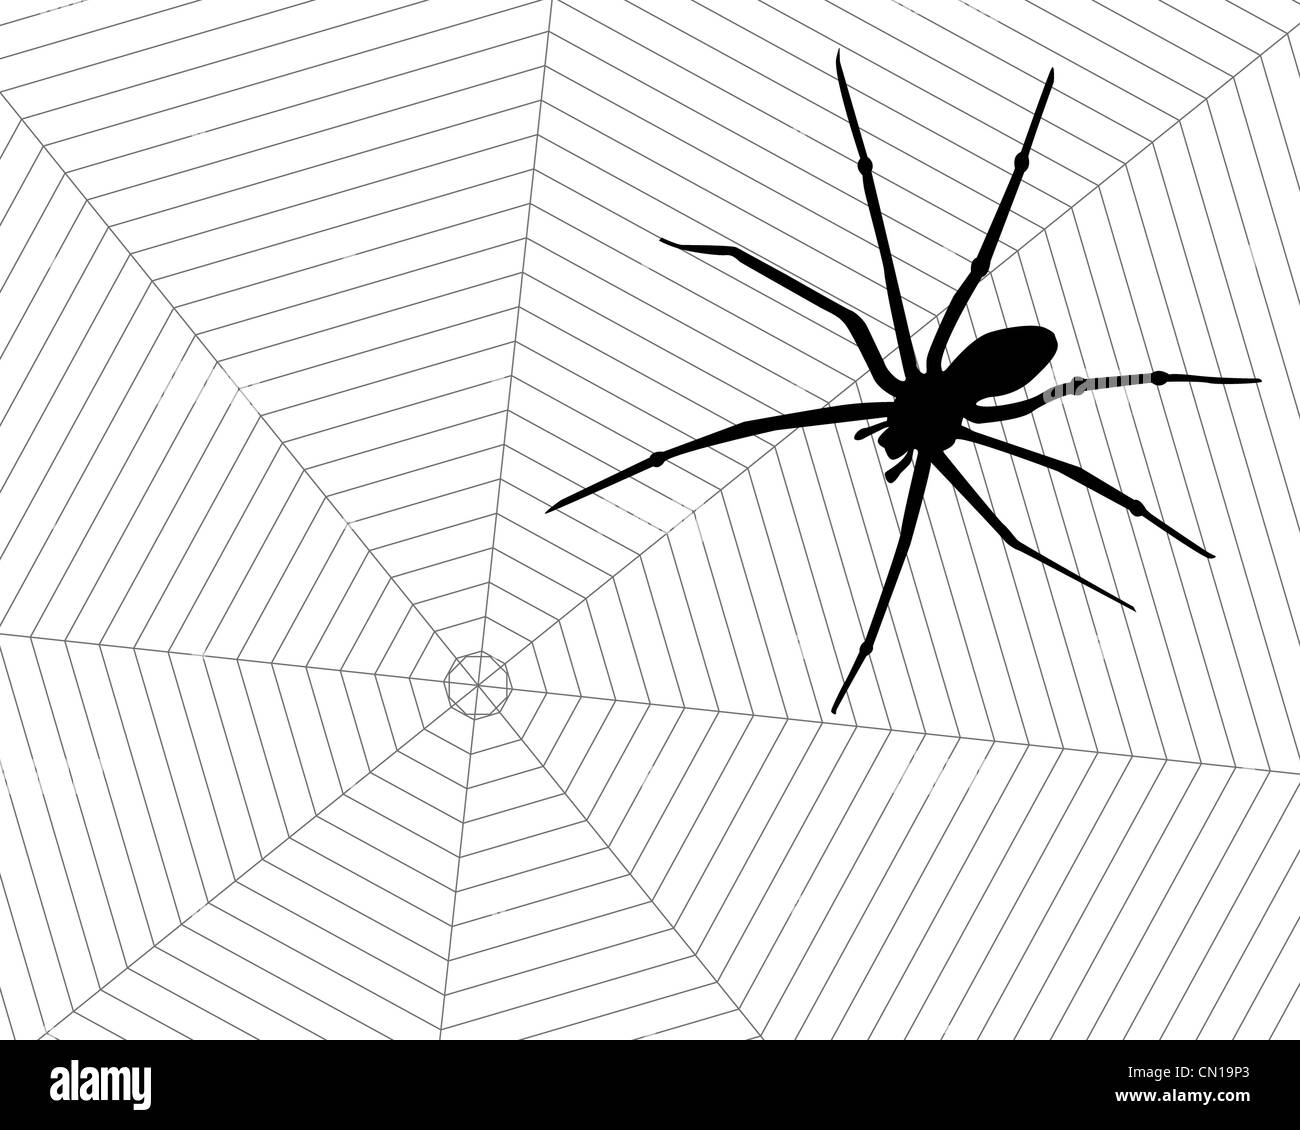 Poisonous black spider in his web. Stock Photo